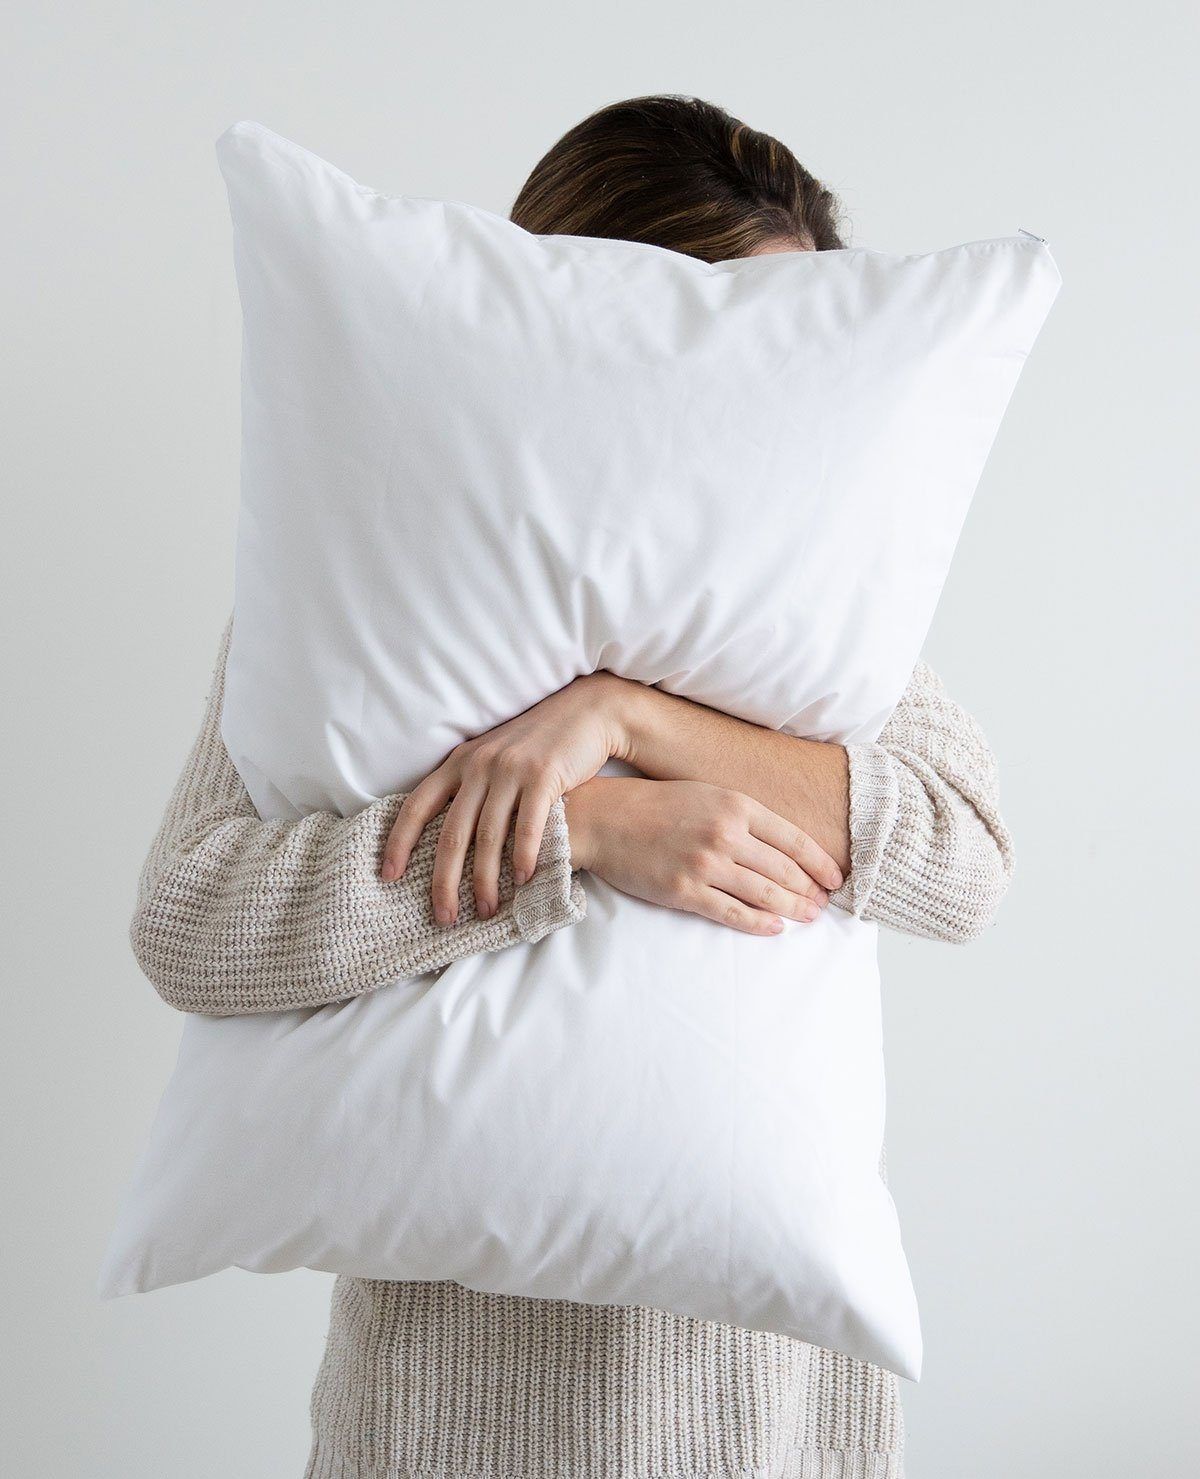 Cozy Comfort: Embracing Down Pillows for Restful Sleep